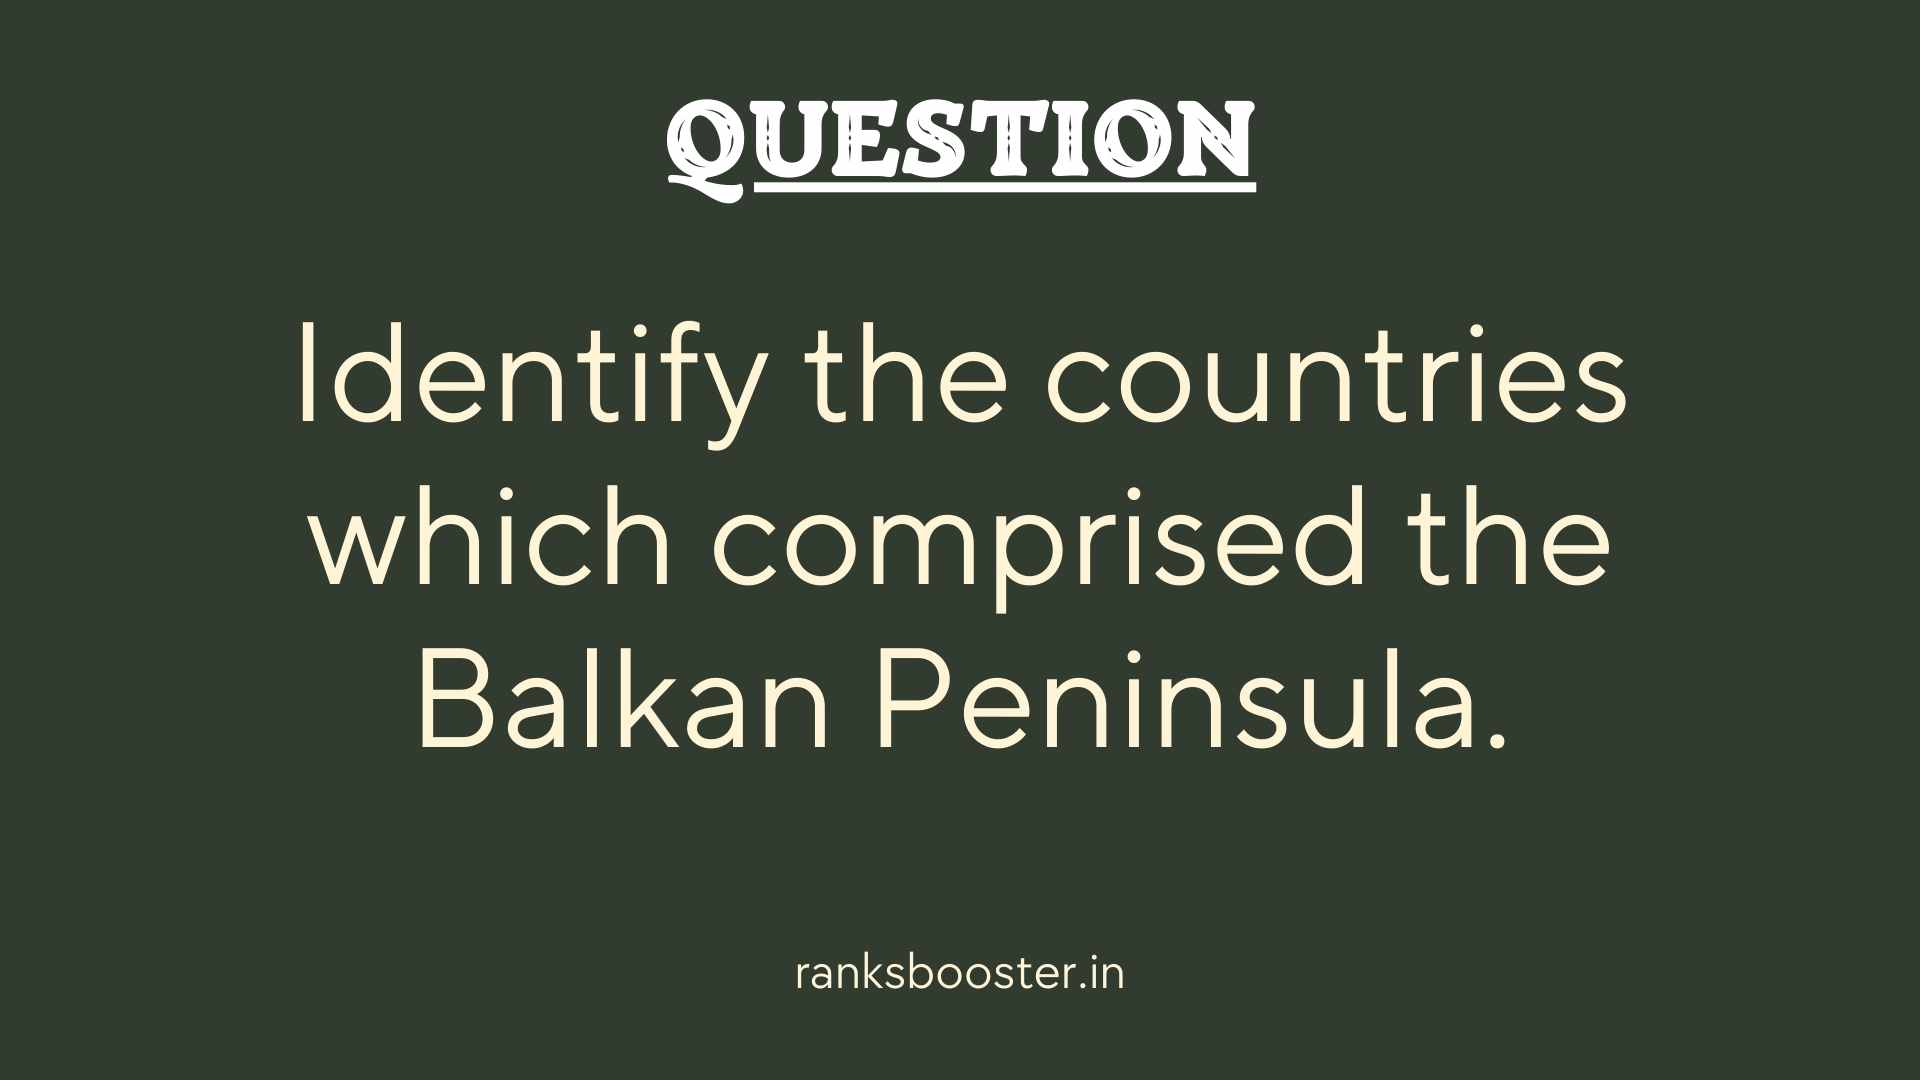 Question: Identify the countries which comprised the Balkan Peninsula.